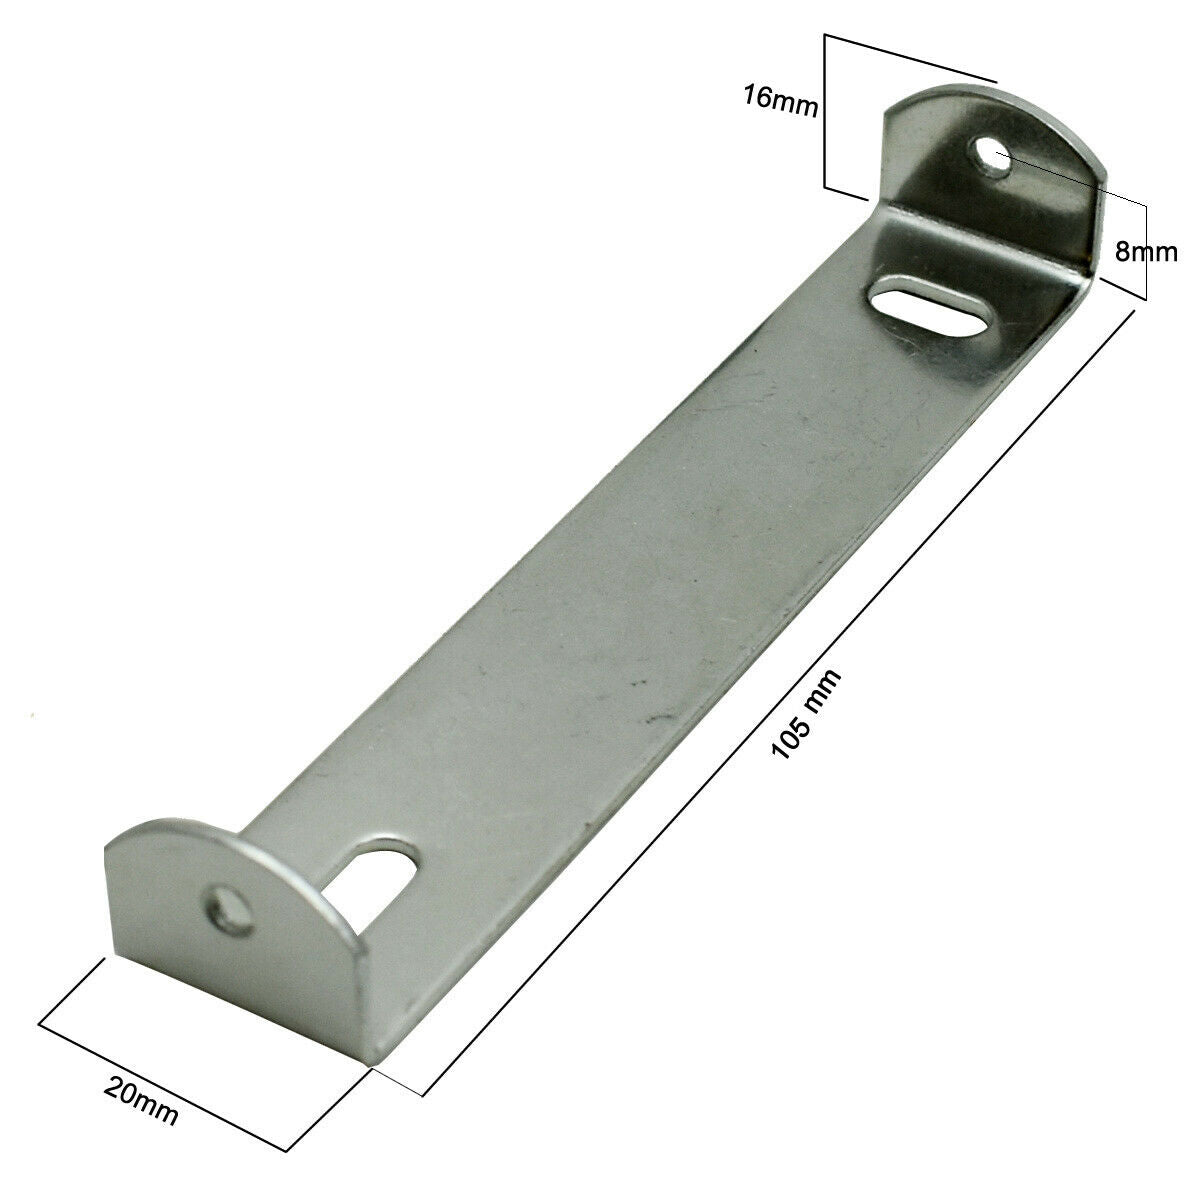 105mm bracket strap brace Plate with accessories